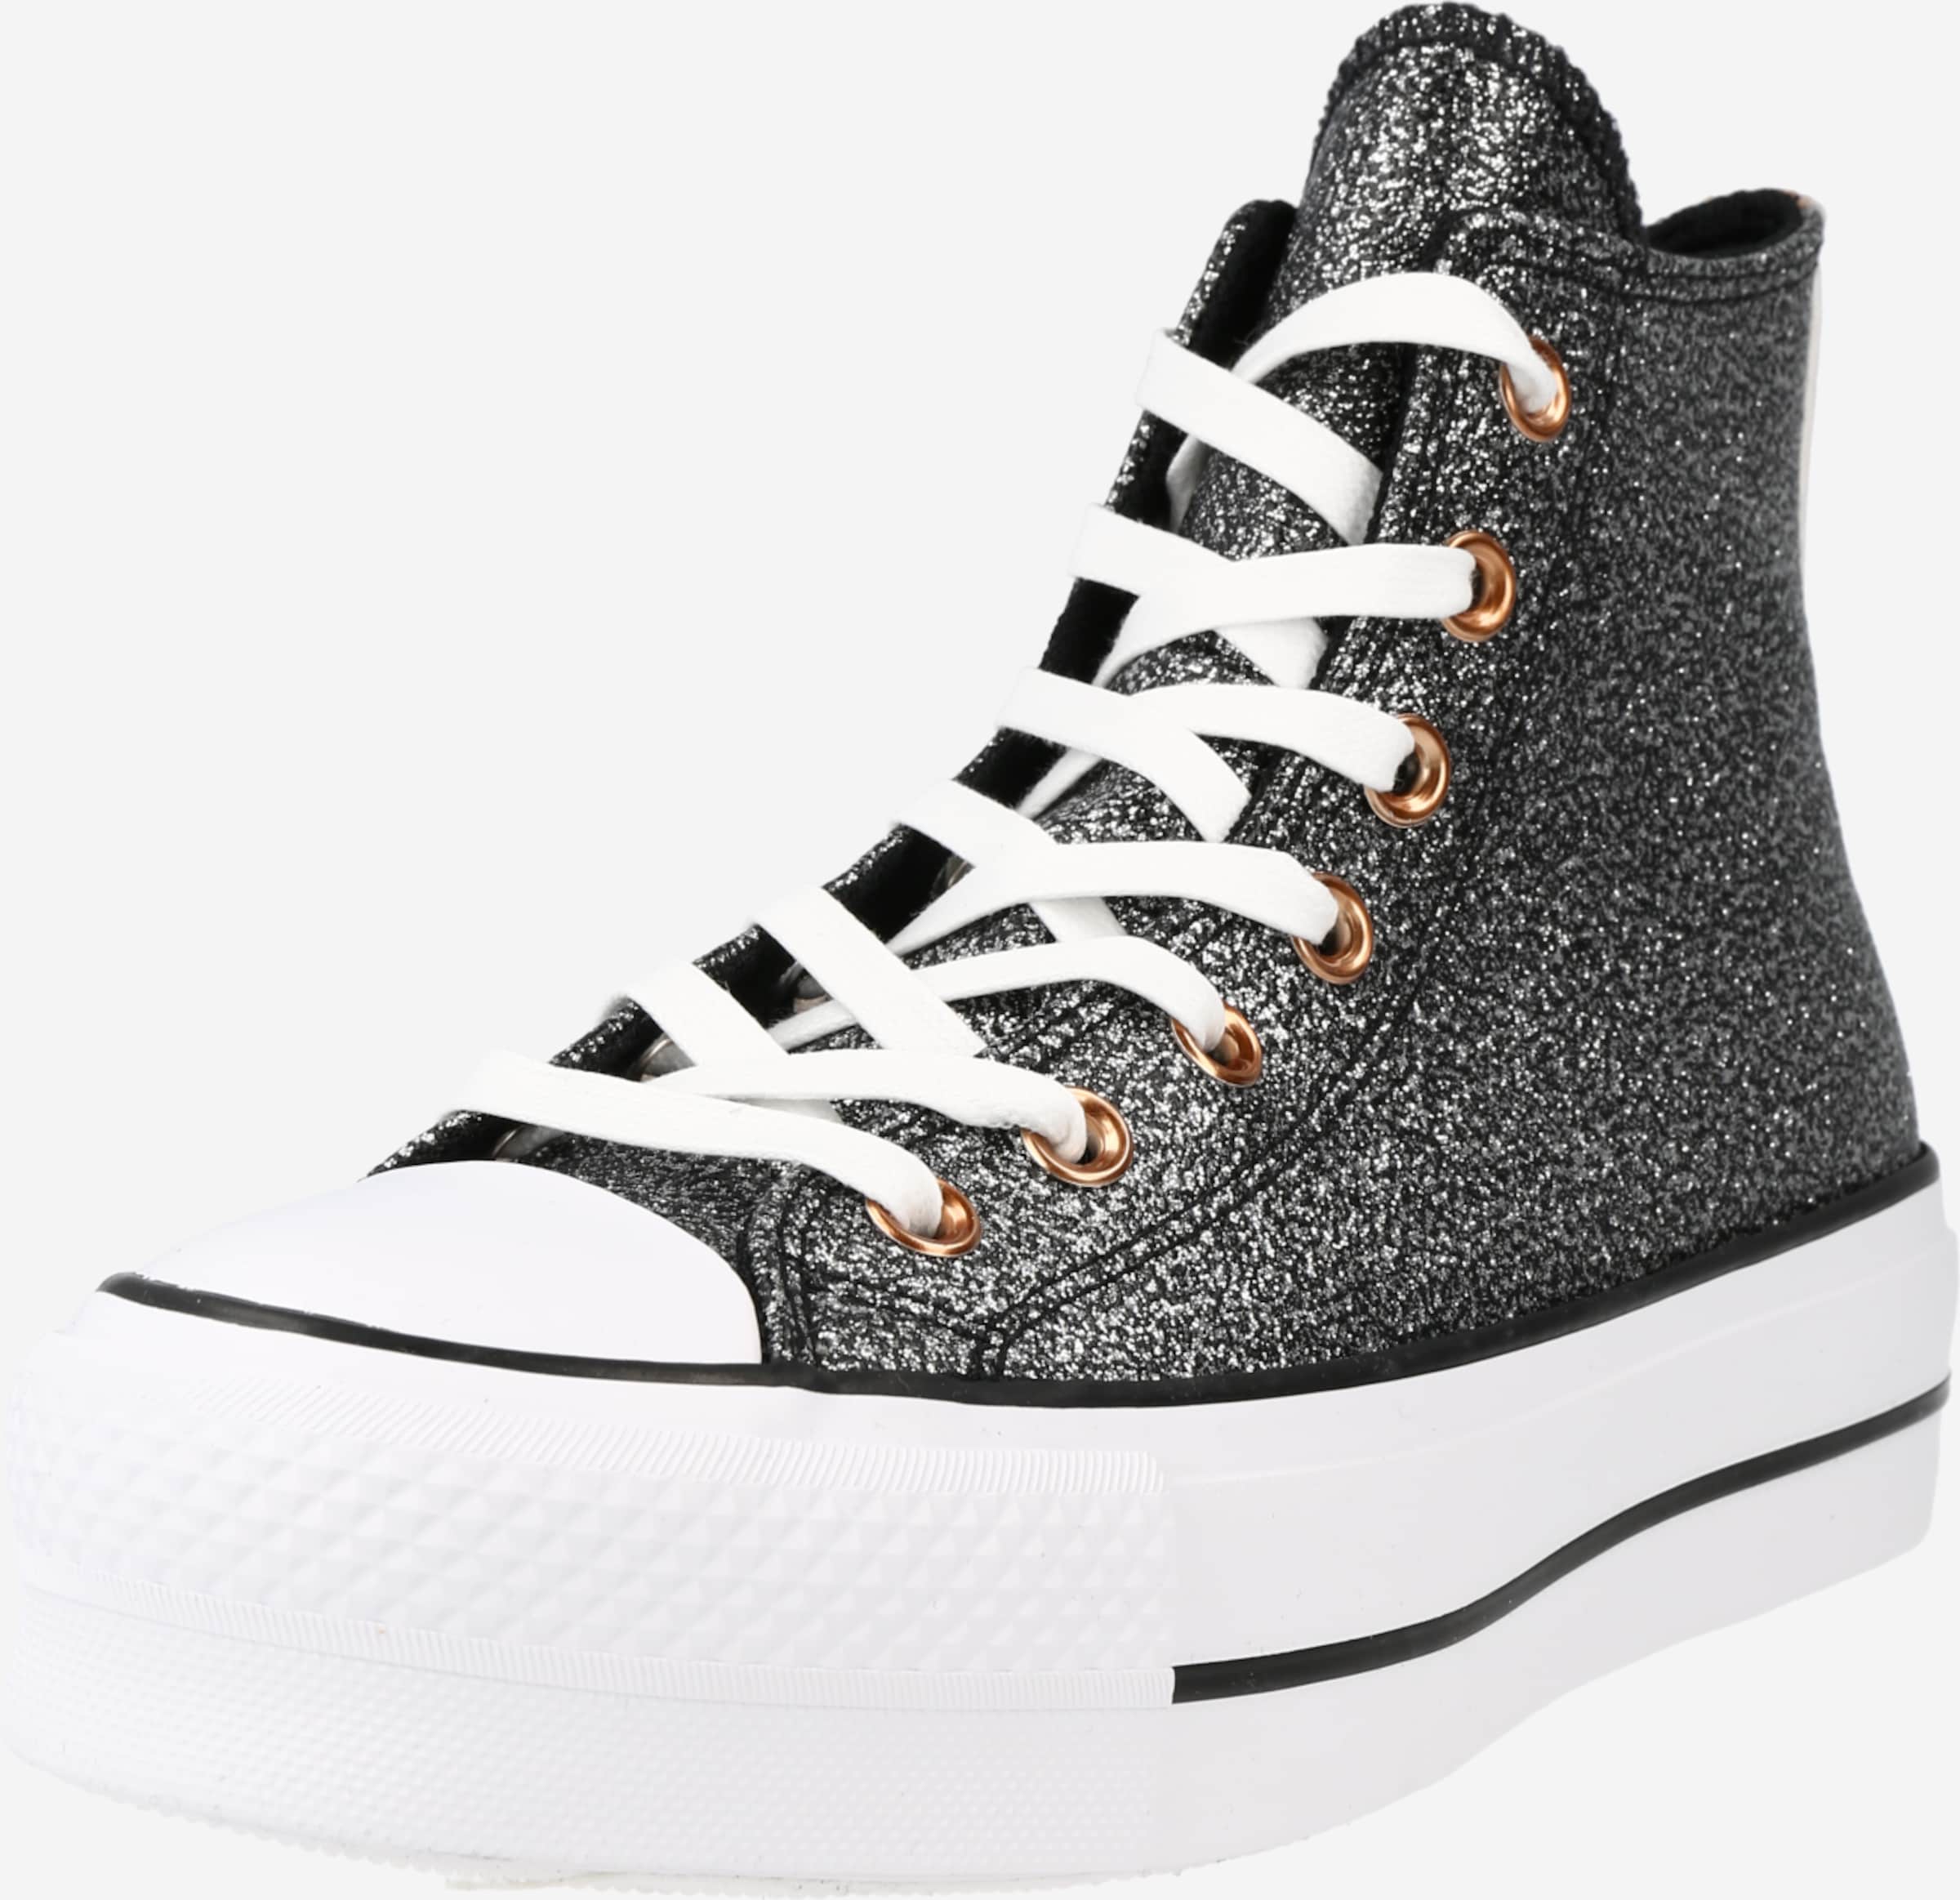 CONVERSE Sneaker 'Chuck Taylor All Star' i | ABOUT YOU